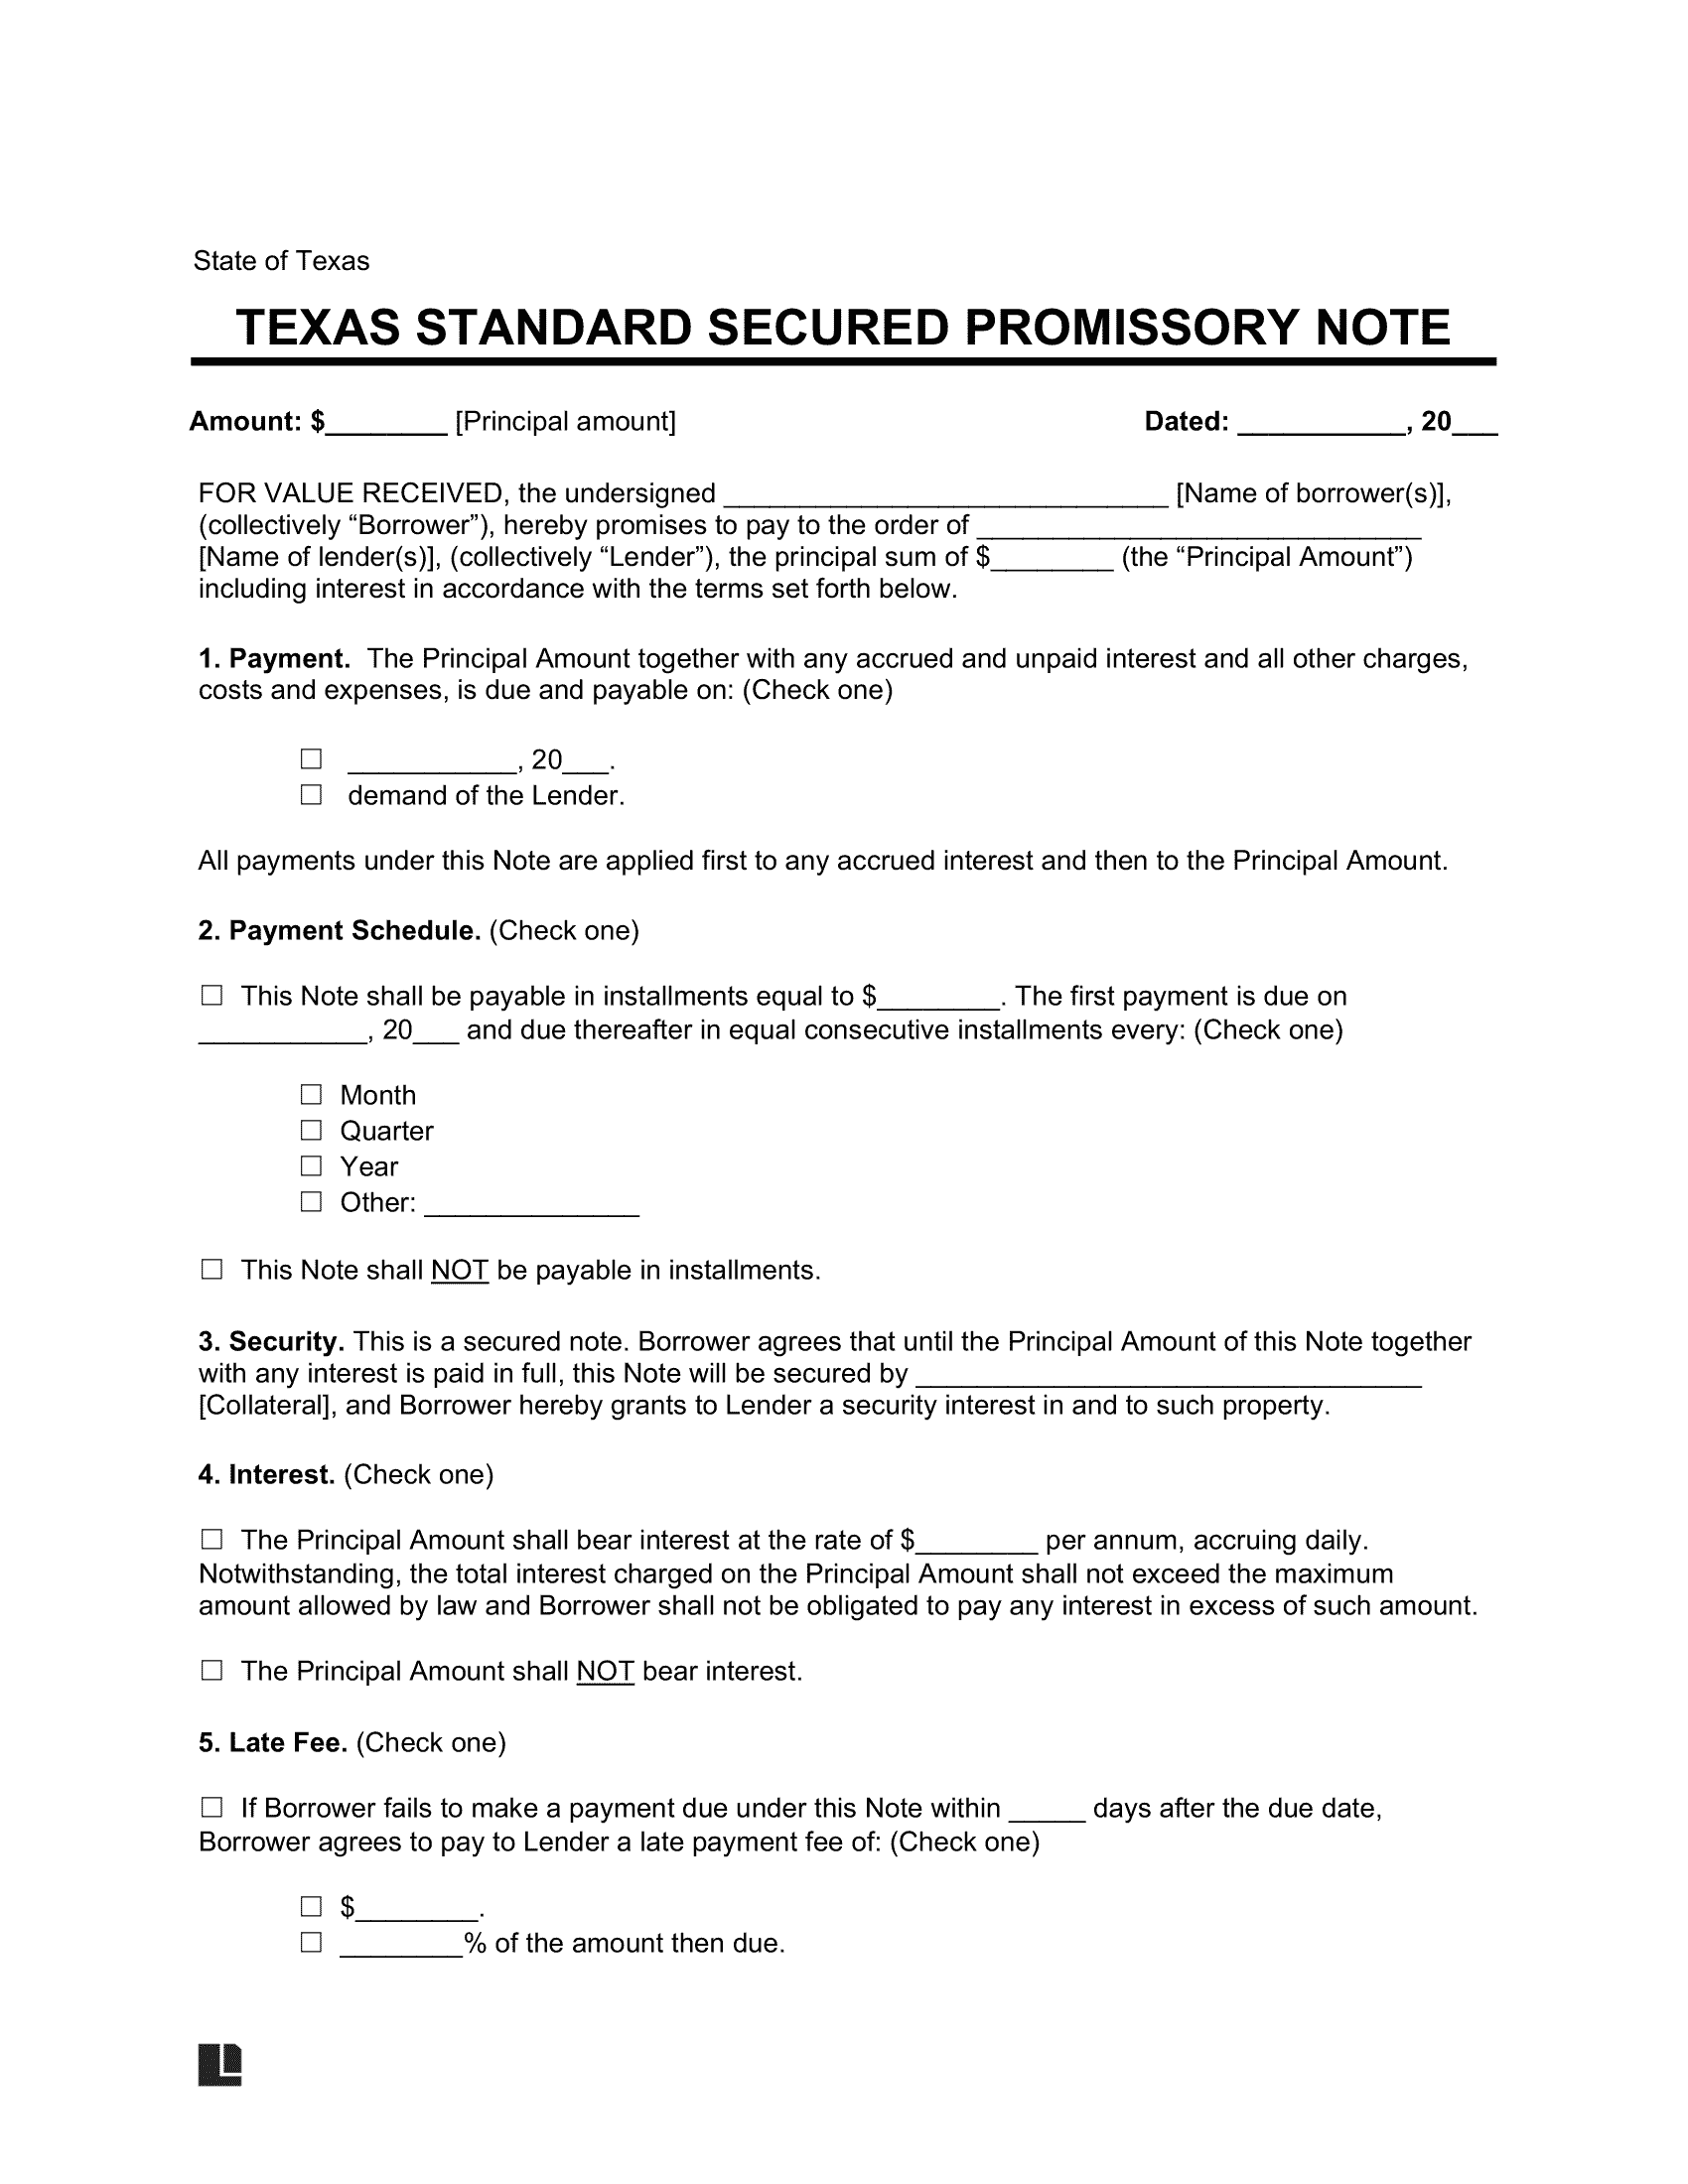 Texas Standard Secured Promissory Note Template